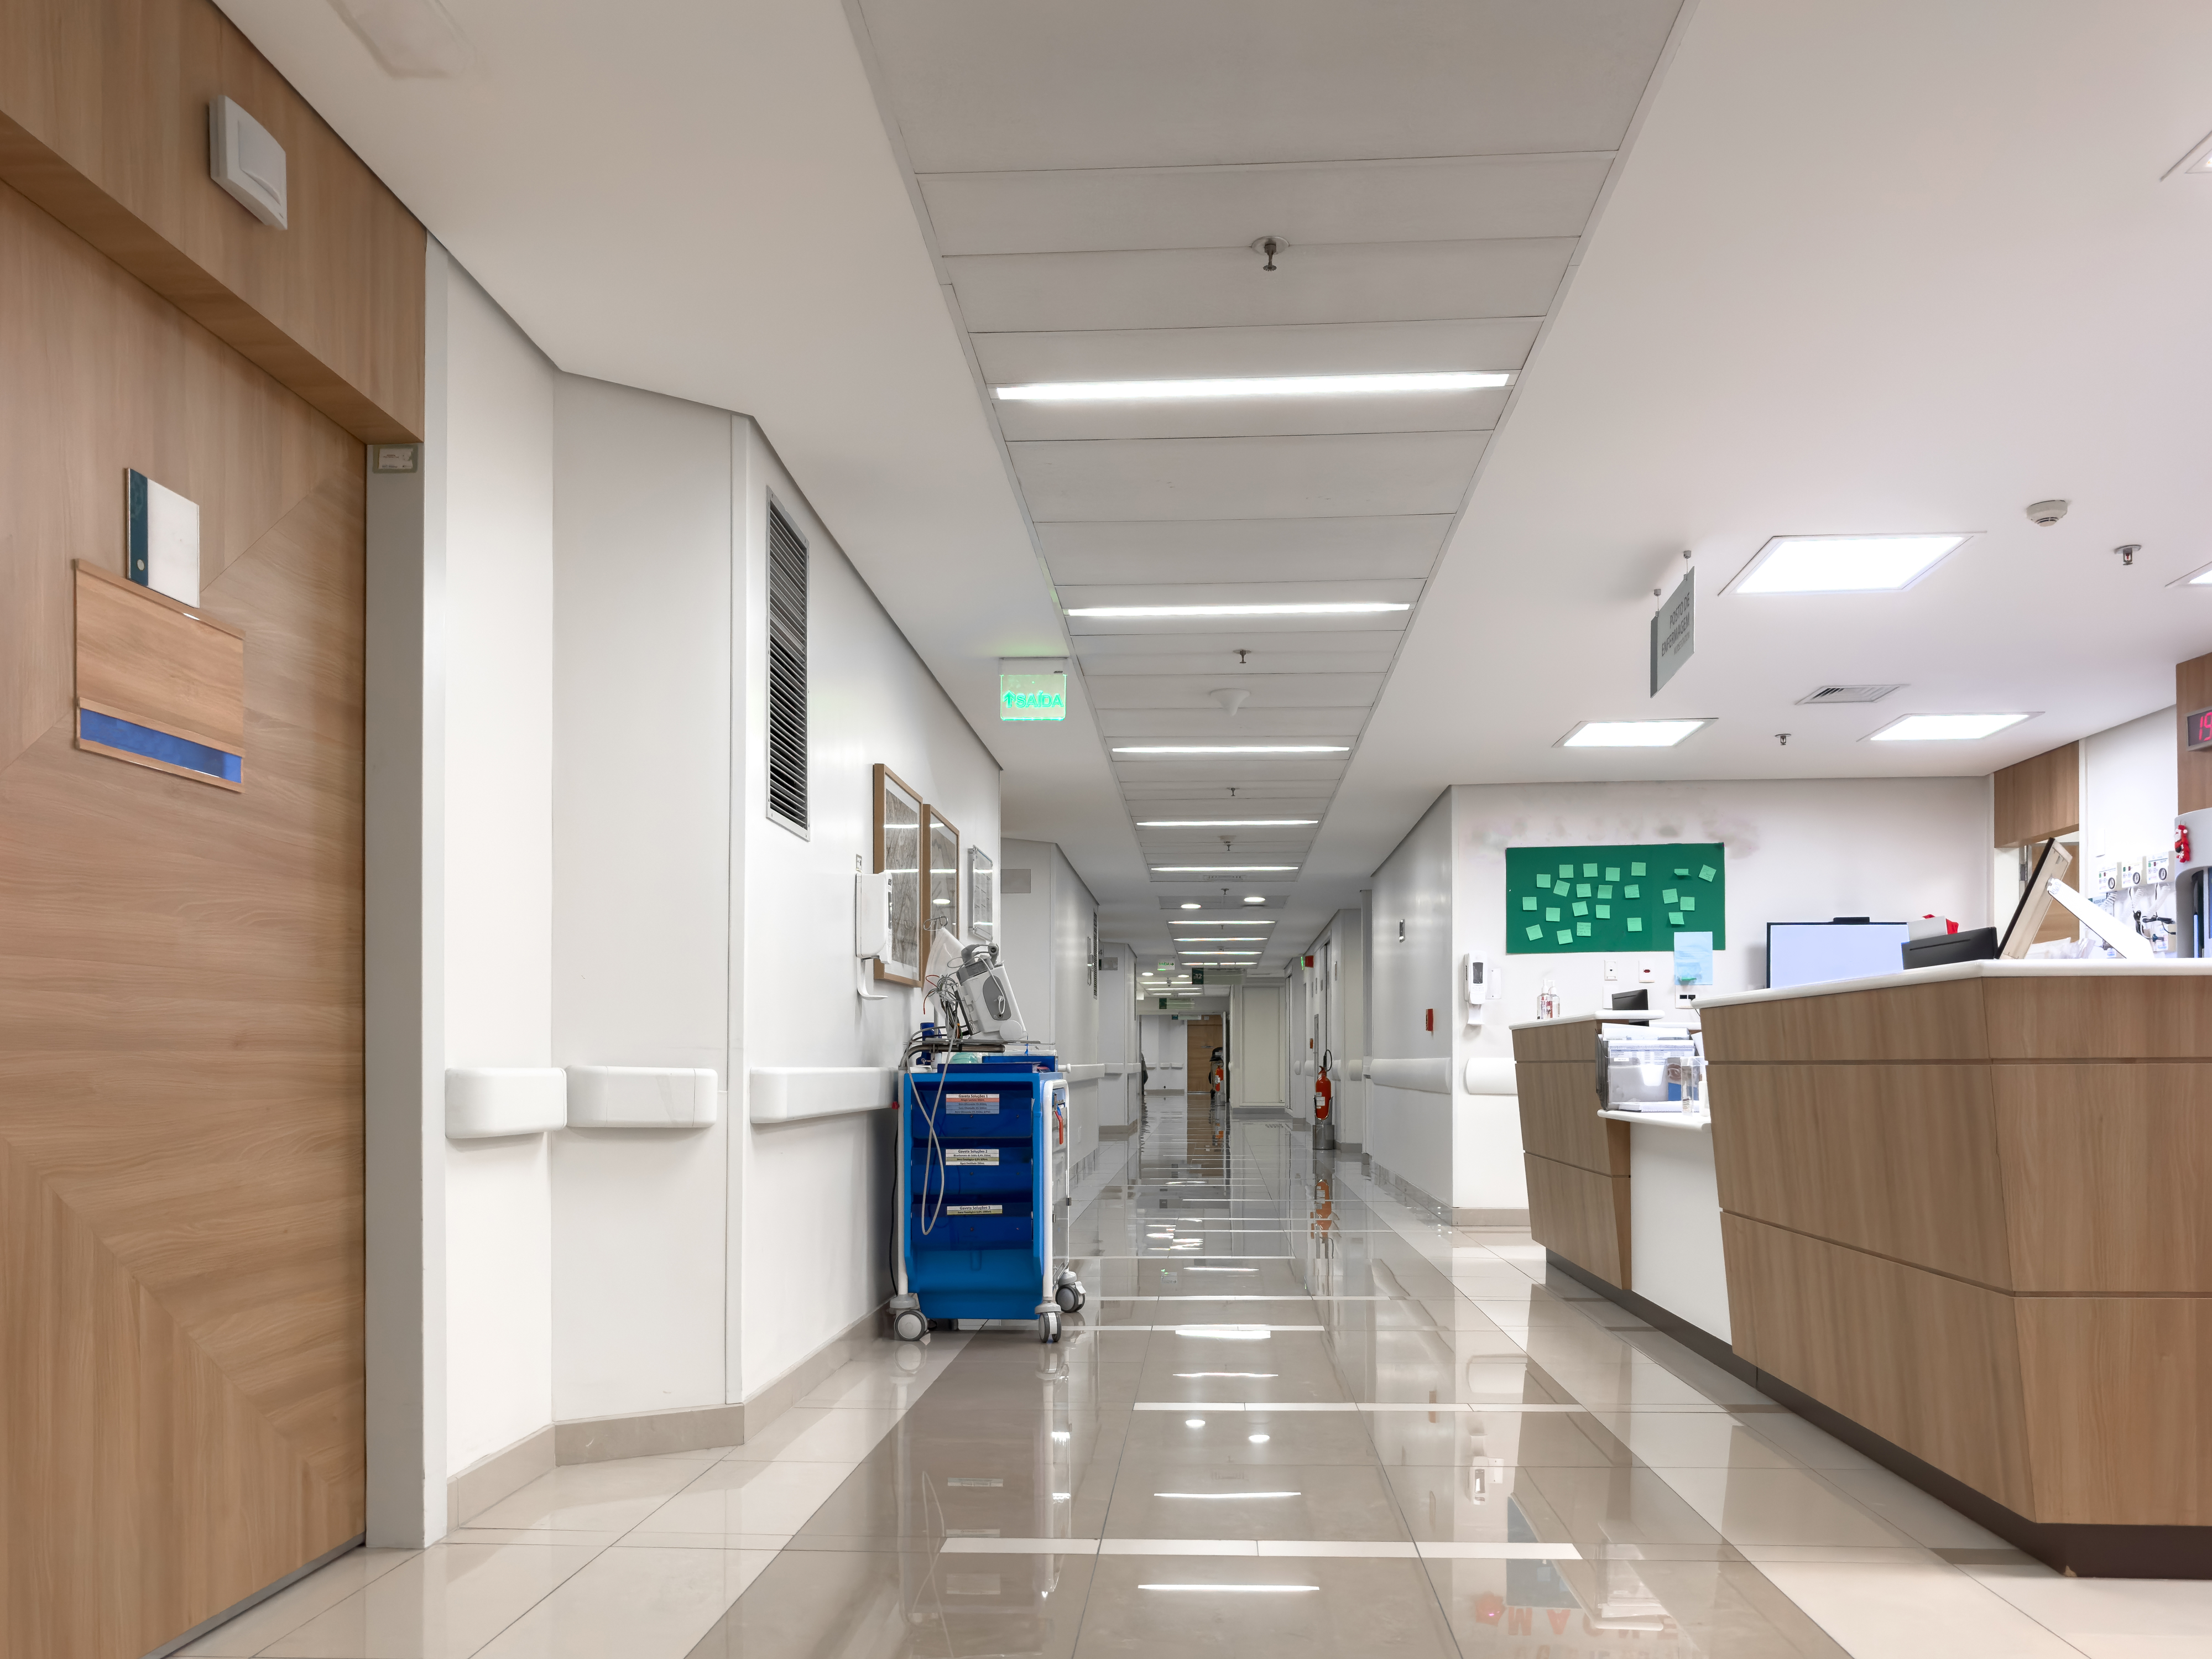 A hospital hallway with medical equipment, including a blue cart, is visible near a nurse&#x27;s station. The corridor leads to multiple rooms and areas